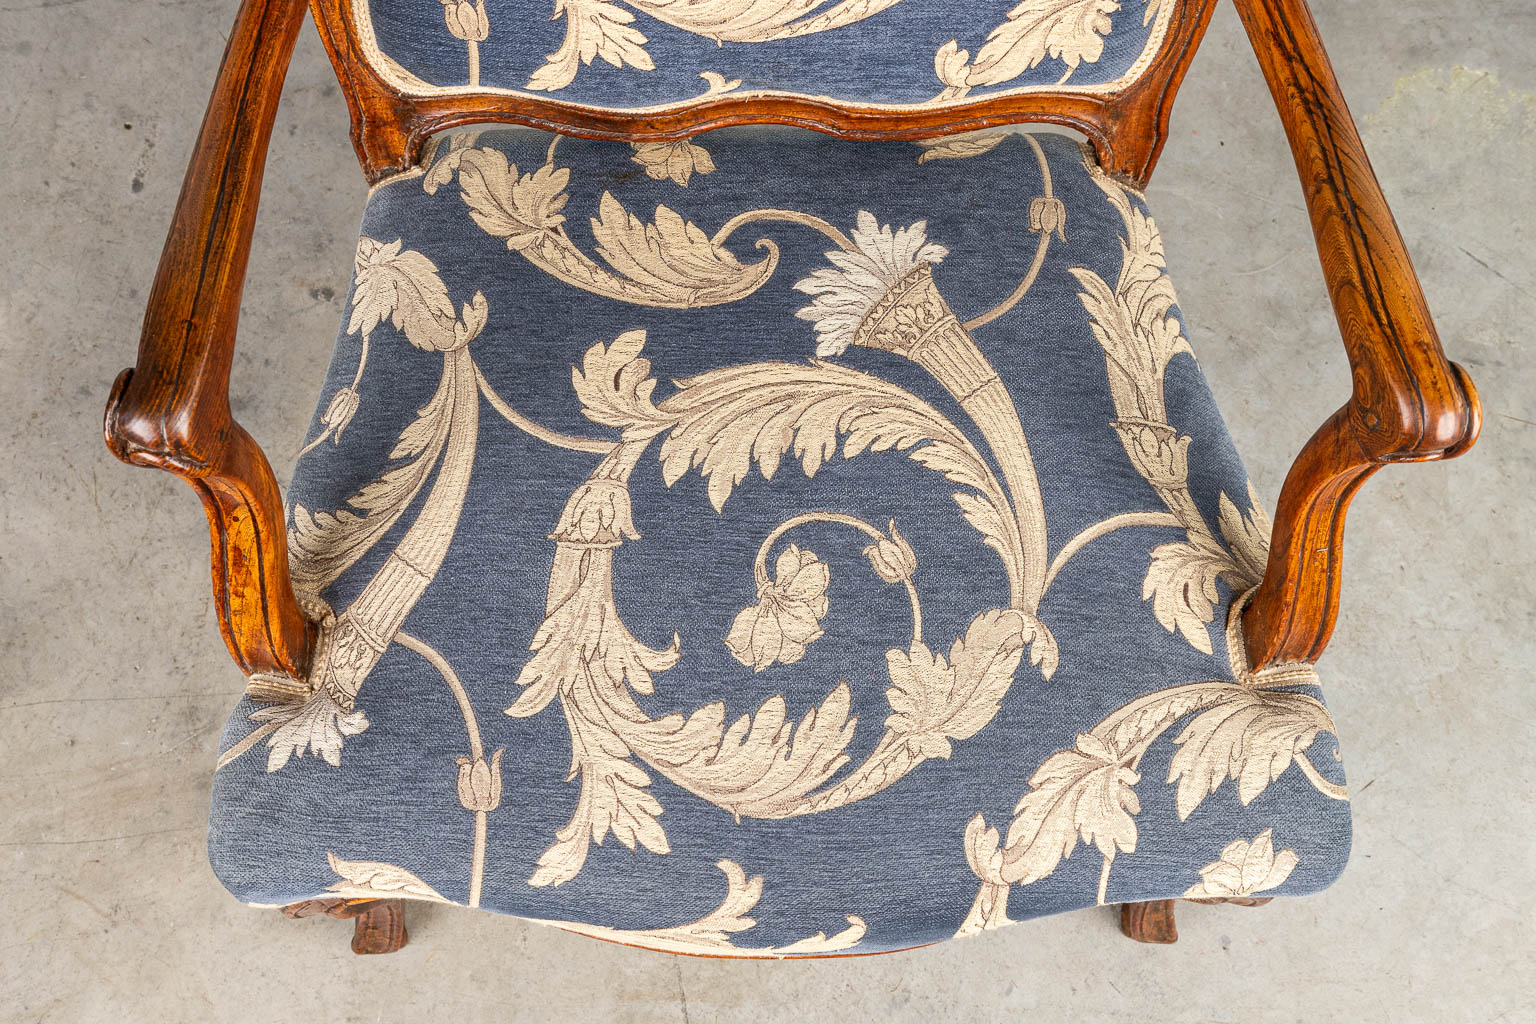 An armchair made in a Louis XV style and upholstered with fabric. Around 1800. (H:96cm)